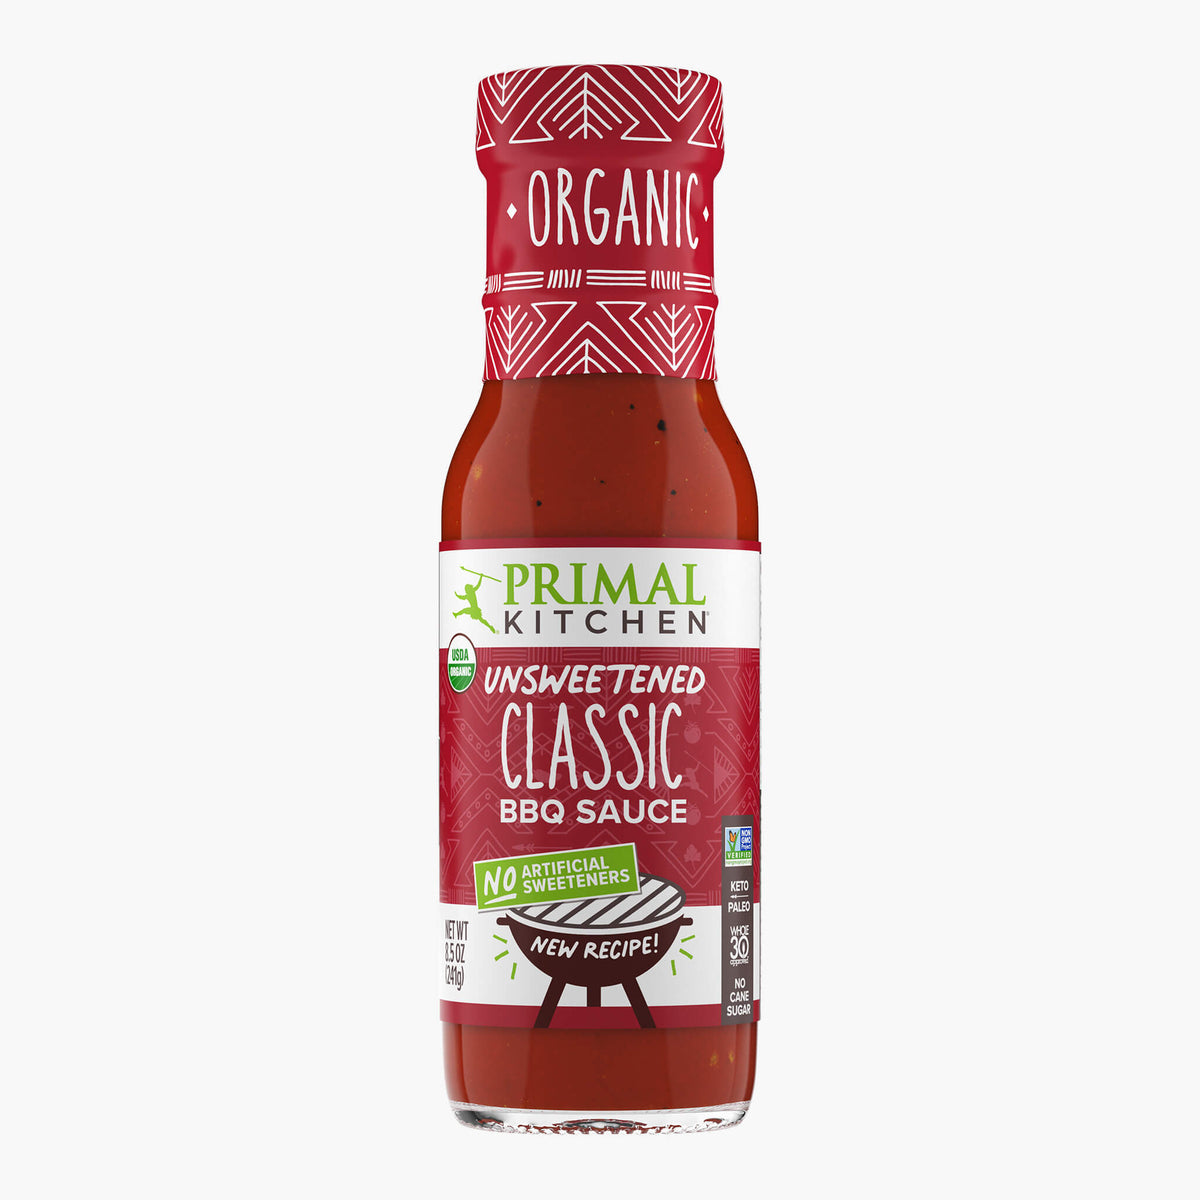 Bottle of Primal Kitchen Organic Unsweetened Classic BBQ Sauce with no artificial sweeteners on a white background